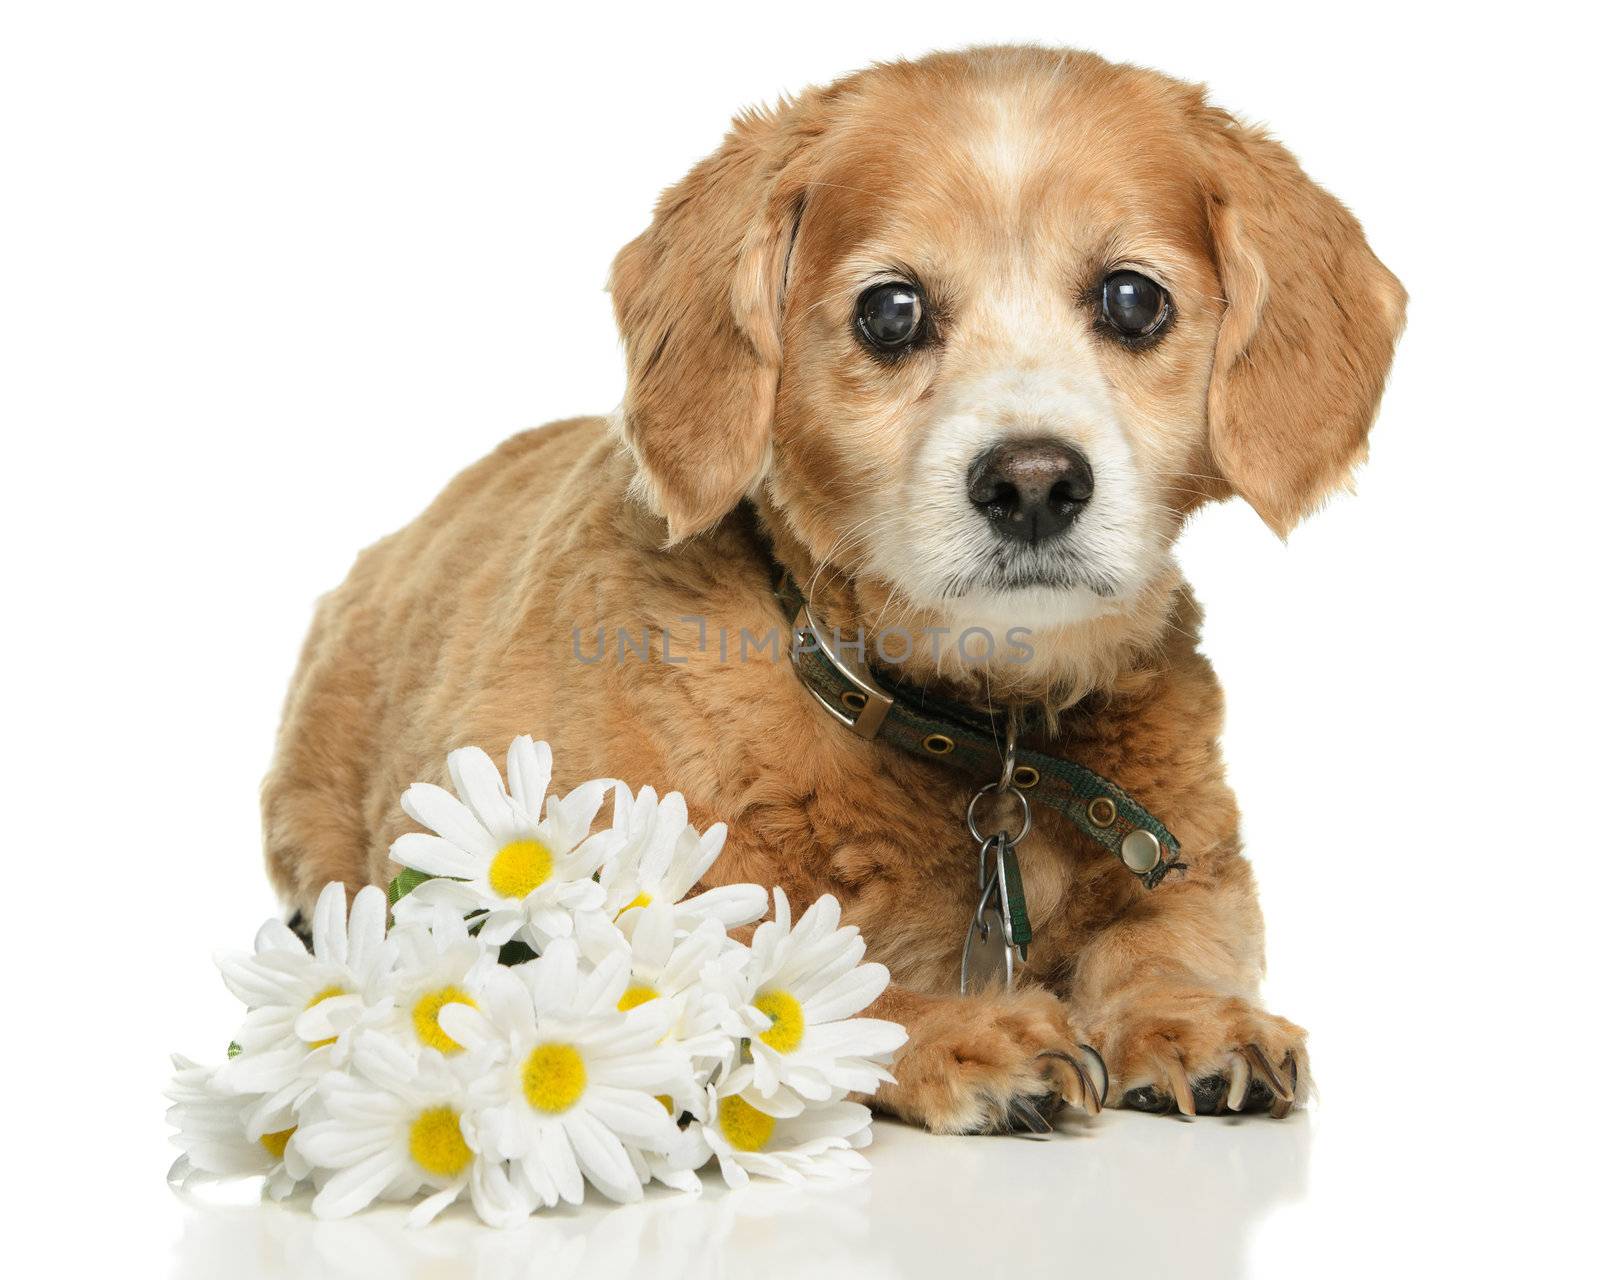 An old adult Cockapoo dog is lying down with some fake daisies, isolated on a white background.